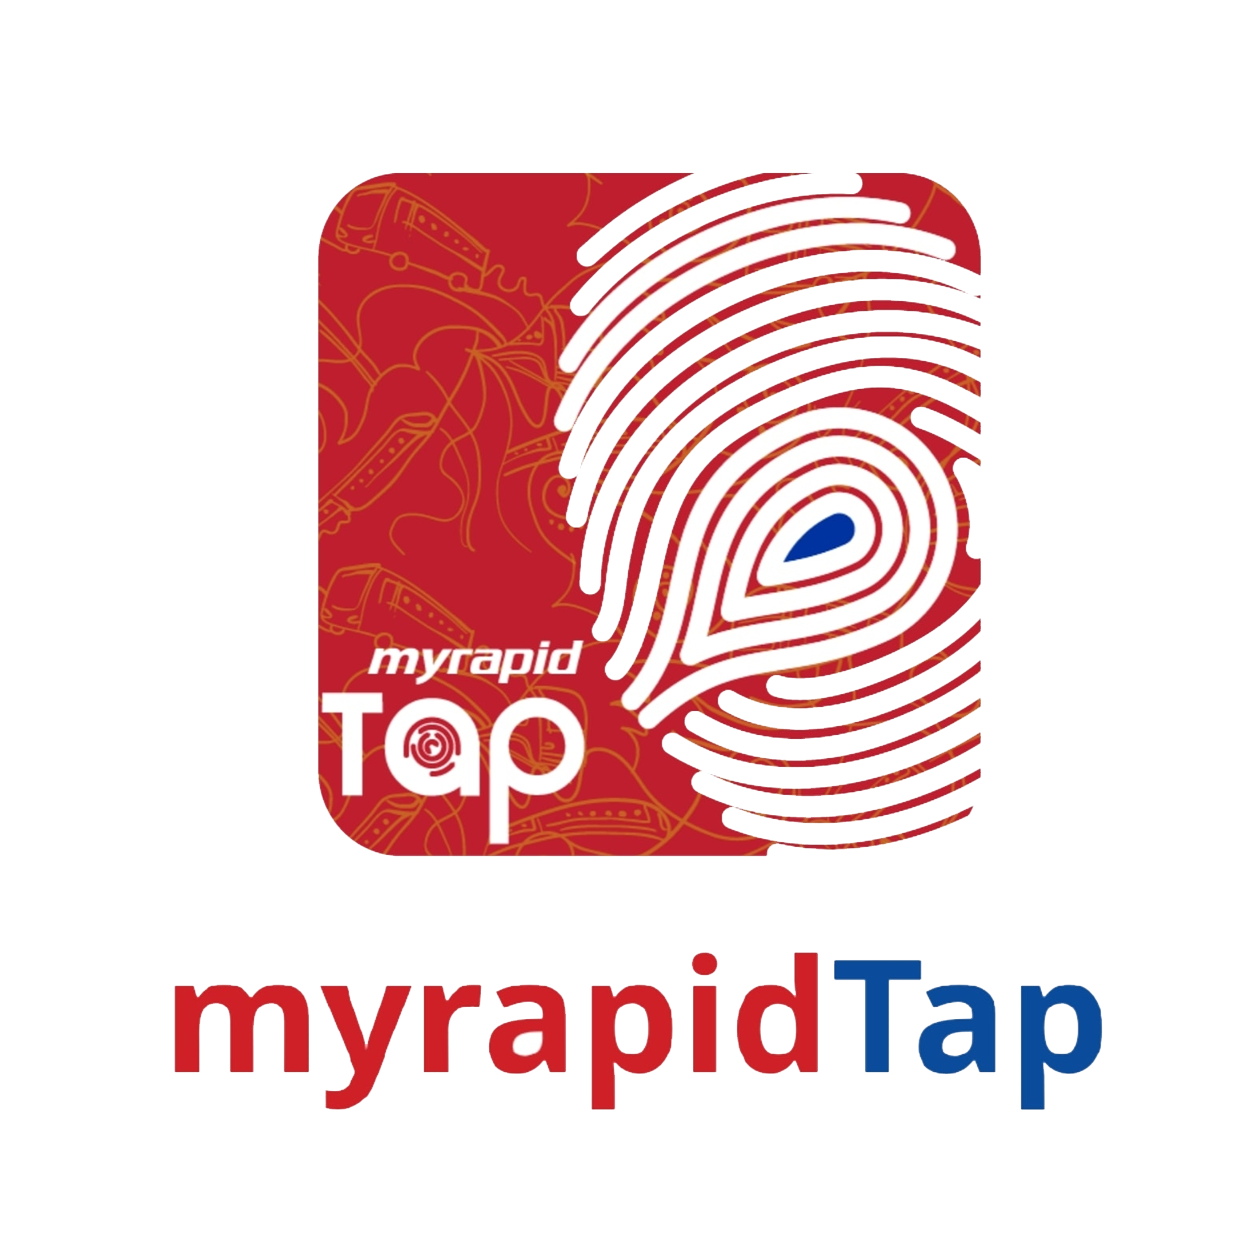 Cashless payments with myrapidTap.